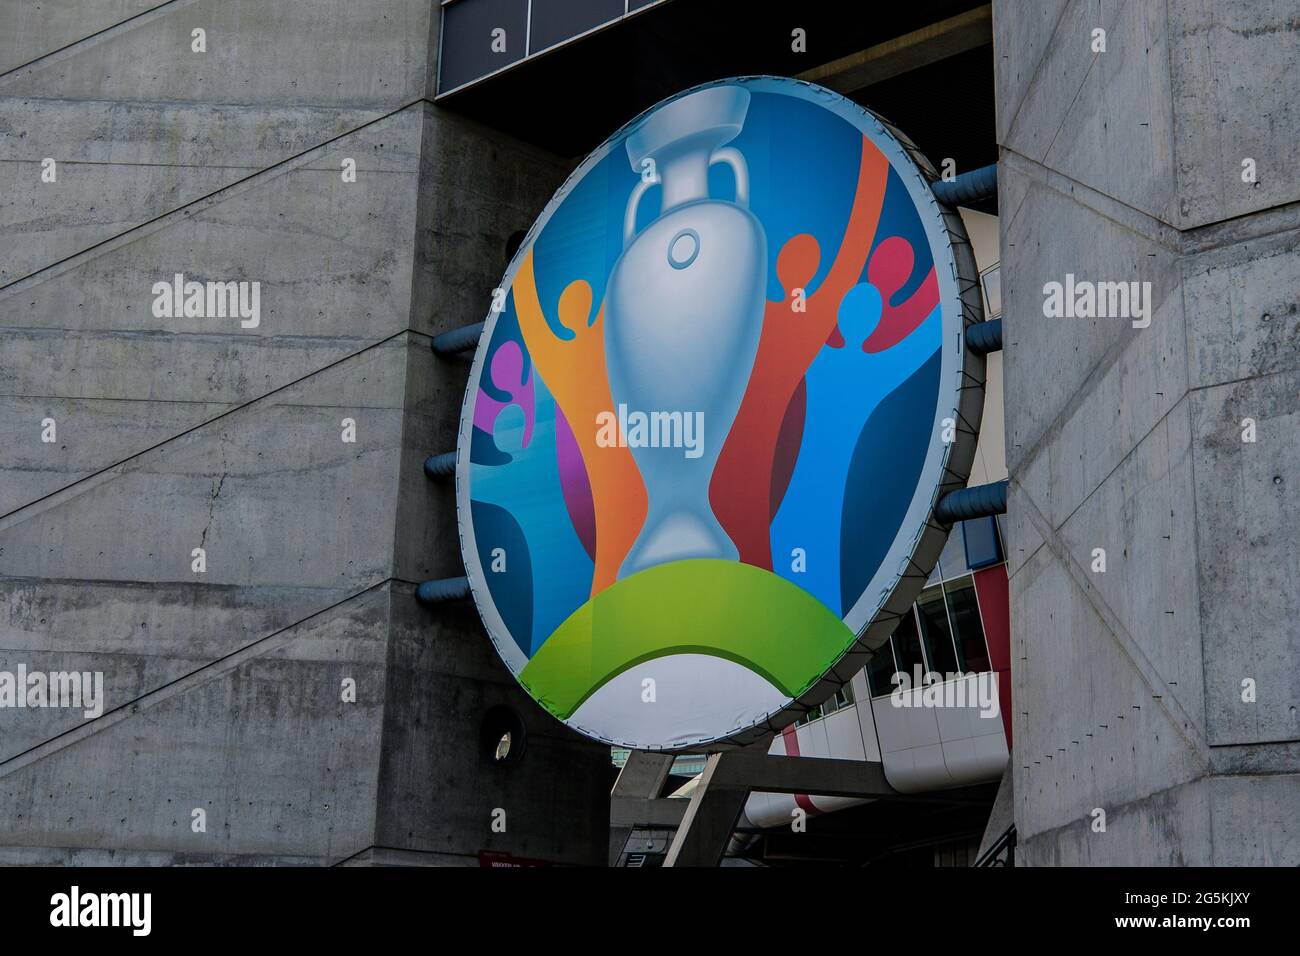 Amsterdam, Netherlands. 26th, June 2021. The UEFA EURO 2020 logo for the European Championship in football. (Photo credit: Gonzales Photo - Robert Hendel). Stock Photo